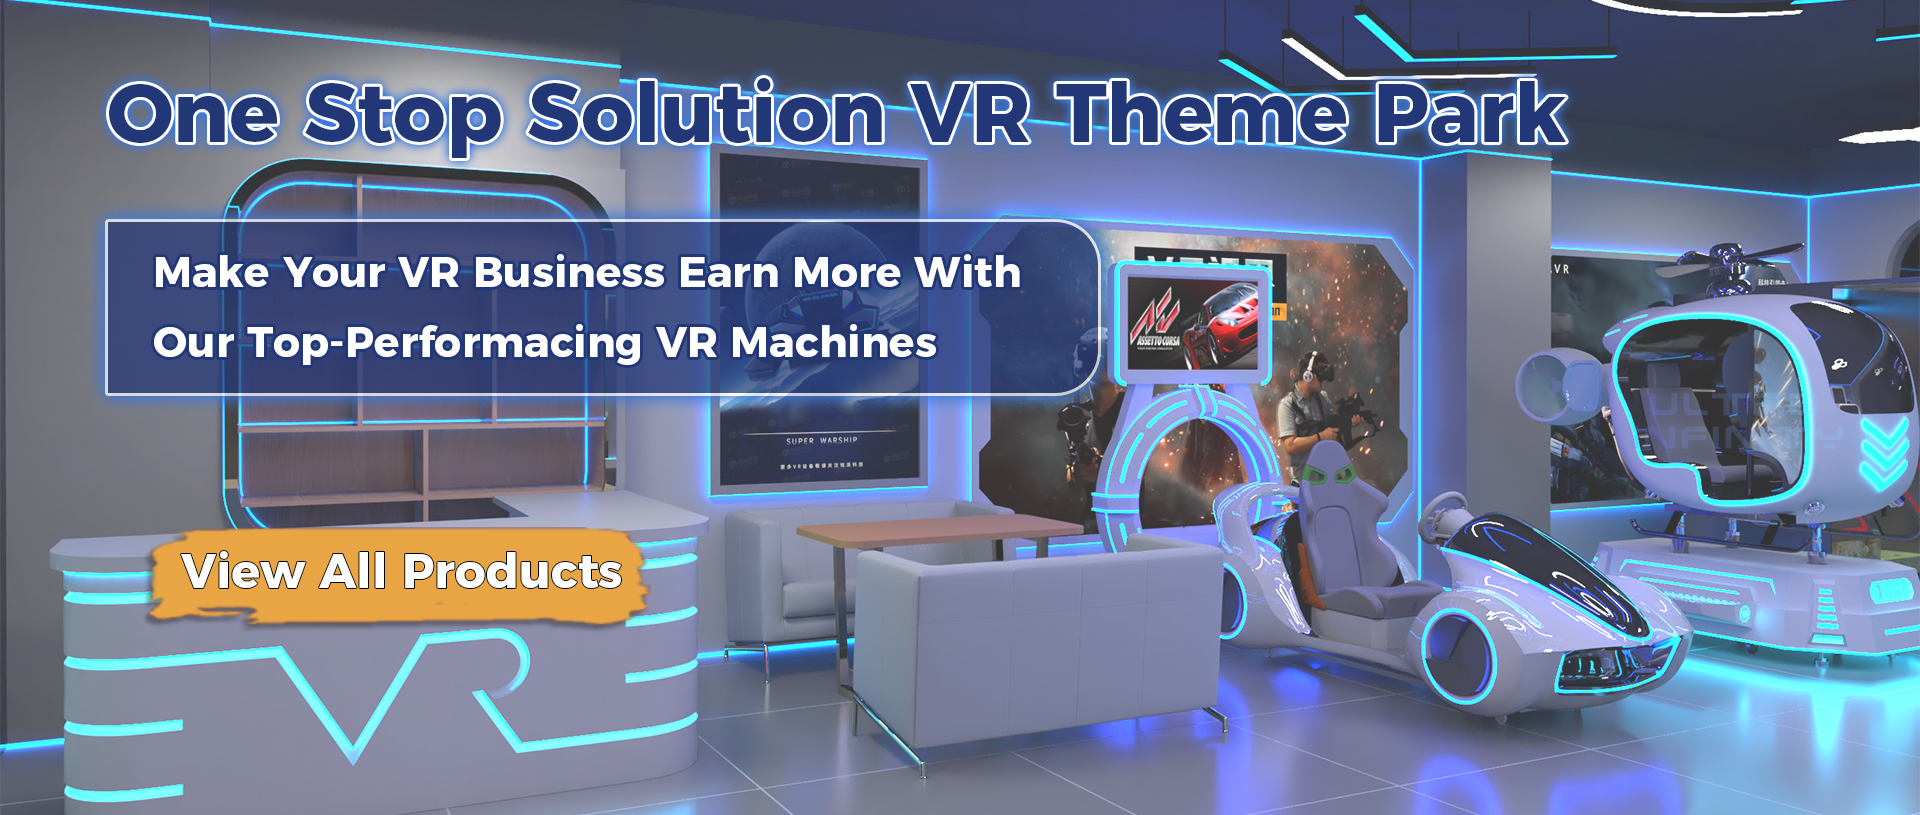 Contact us for your one stop solution vr theme park service.